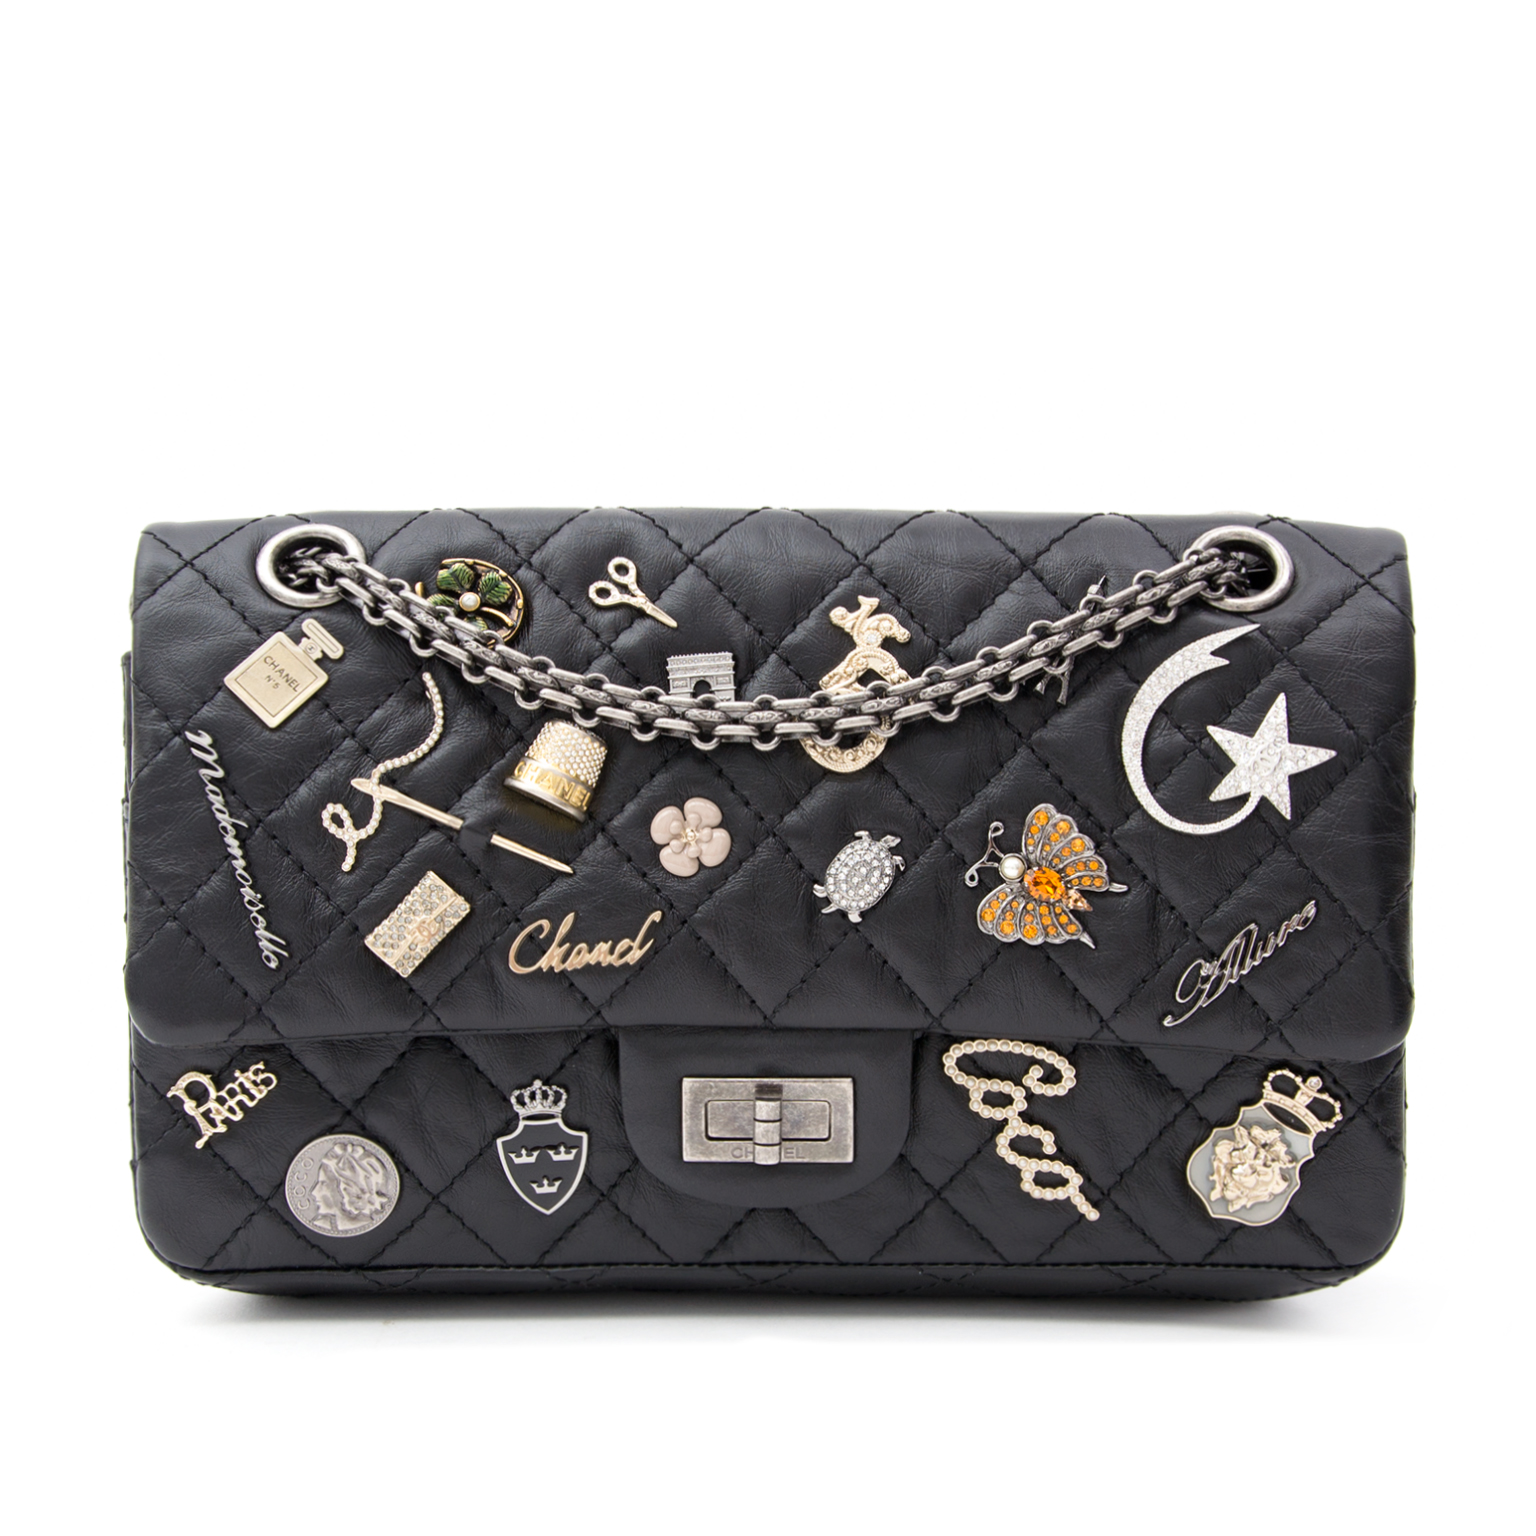 Chanel Black Reissue 255 Lucky Charm Bag Size 224  Worlds Best